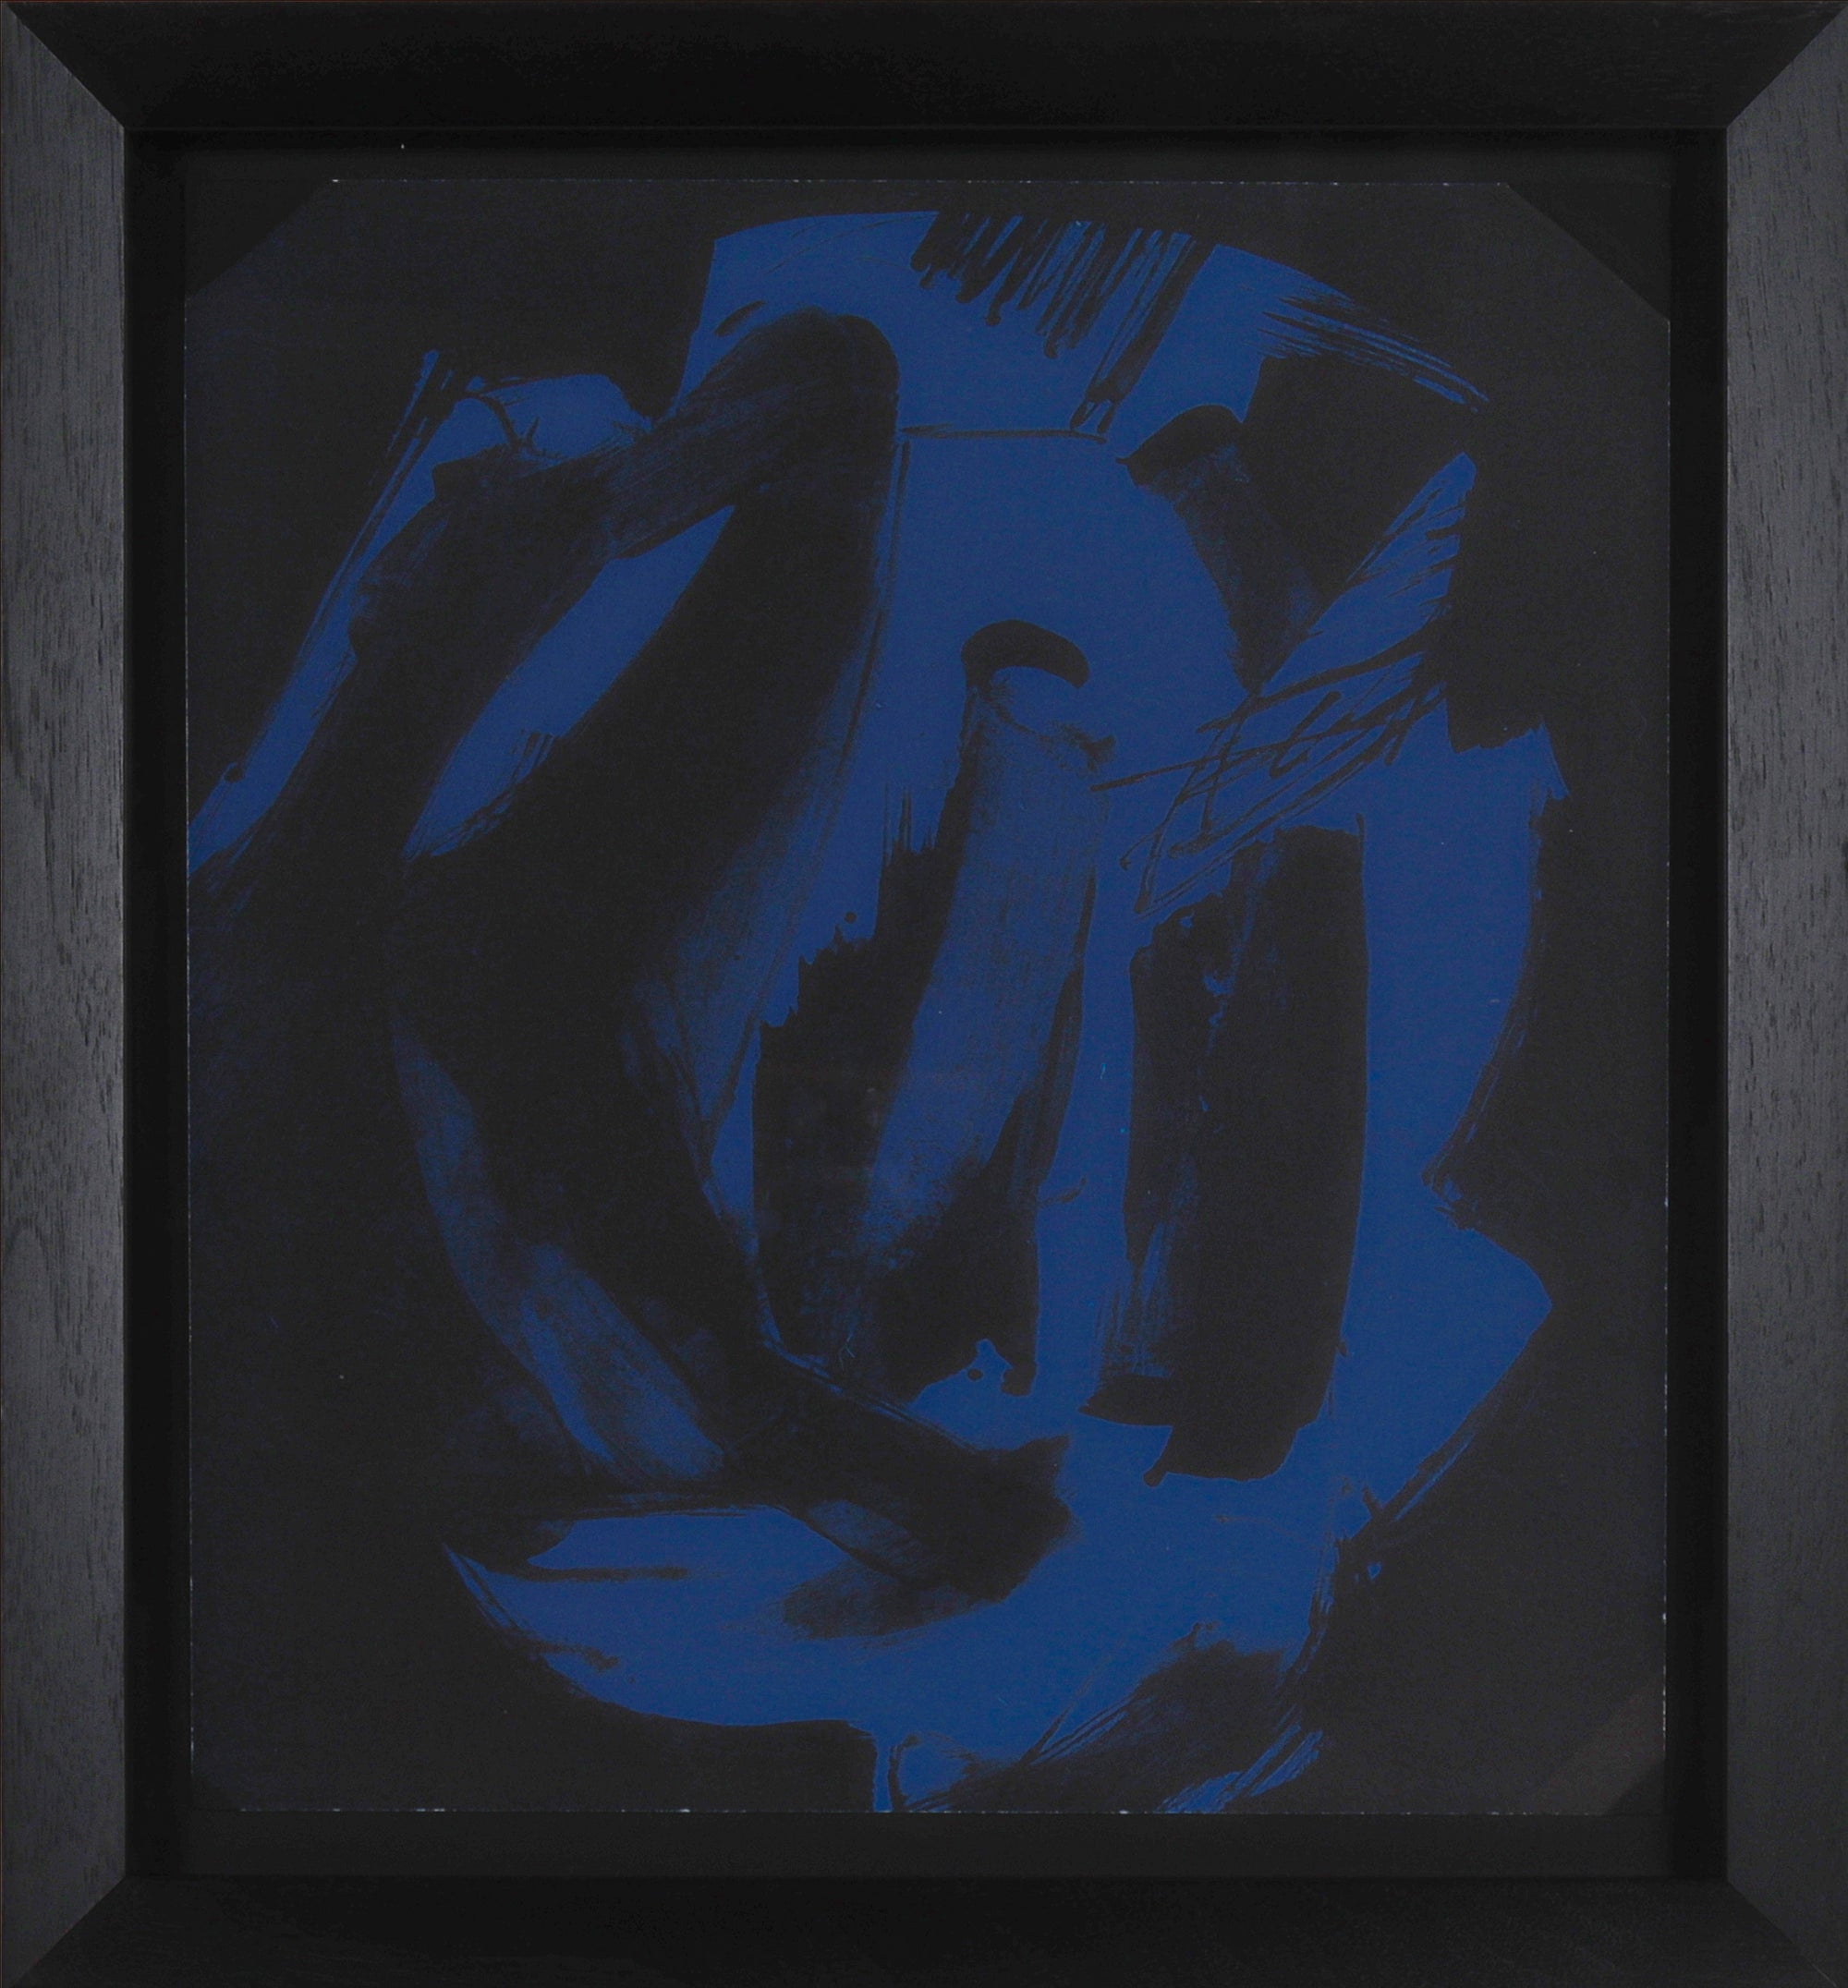 Abstract Print in Blue & Black<br>1997 Lithograph <br><br>#96831